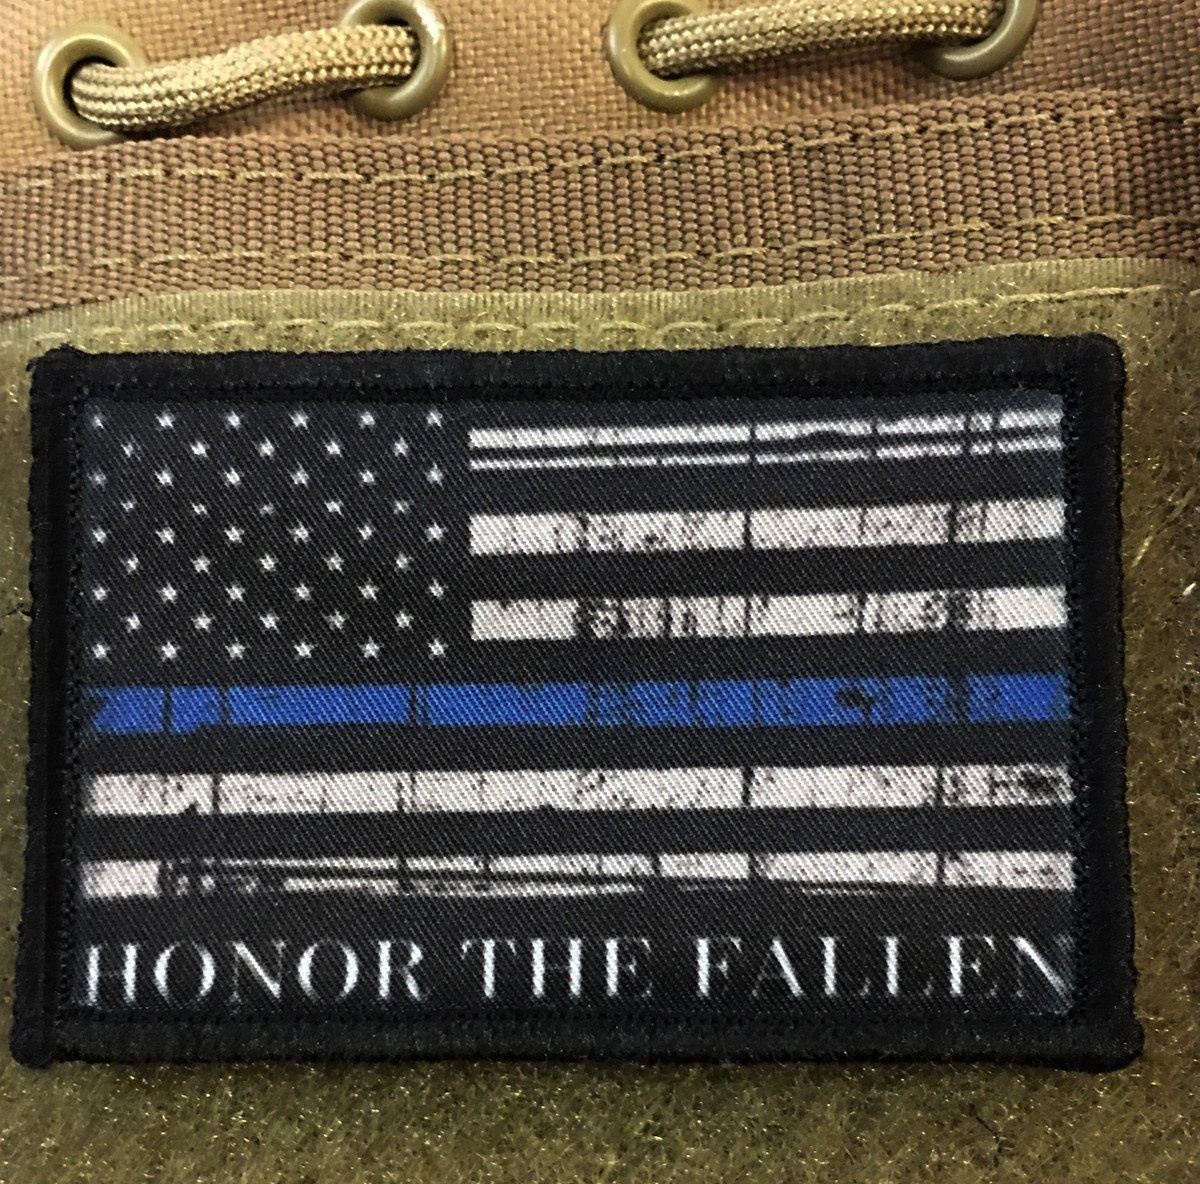 Thin Blue Line 'Honor The Fallen' Morale Patch Morale Patches Redheaded T Shirts 